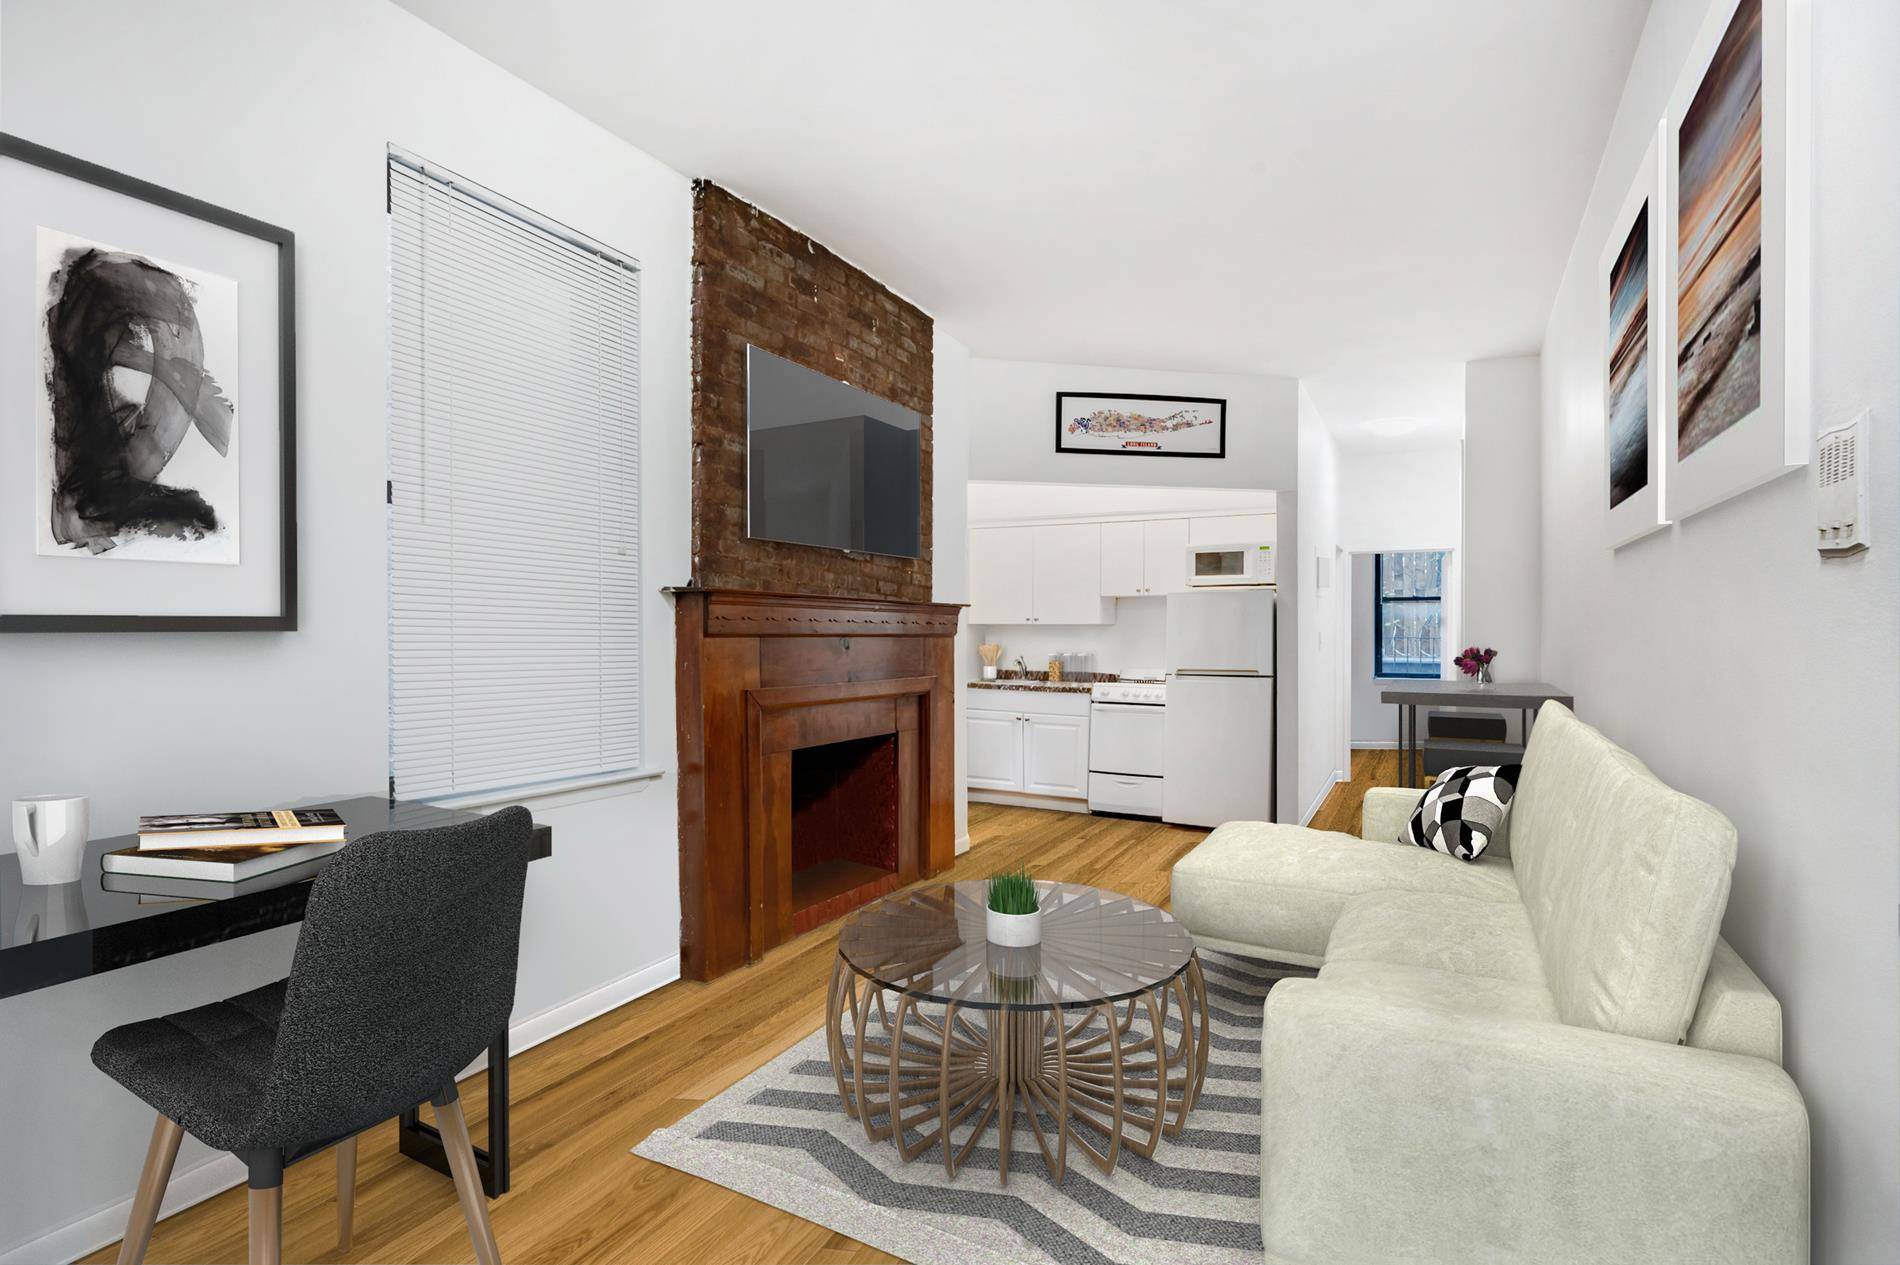 This is an incredible TRUE 1 BED 1 BATH, located in one of the most desired neighborhoods in NYC !